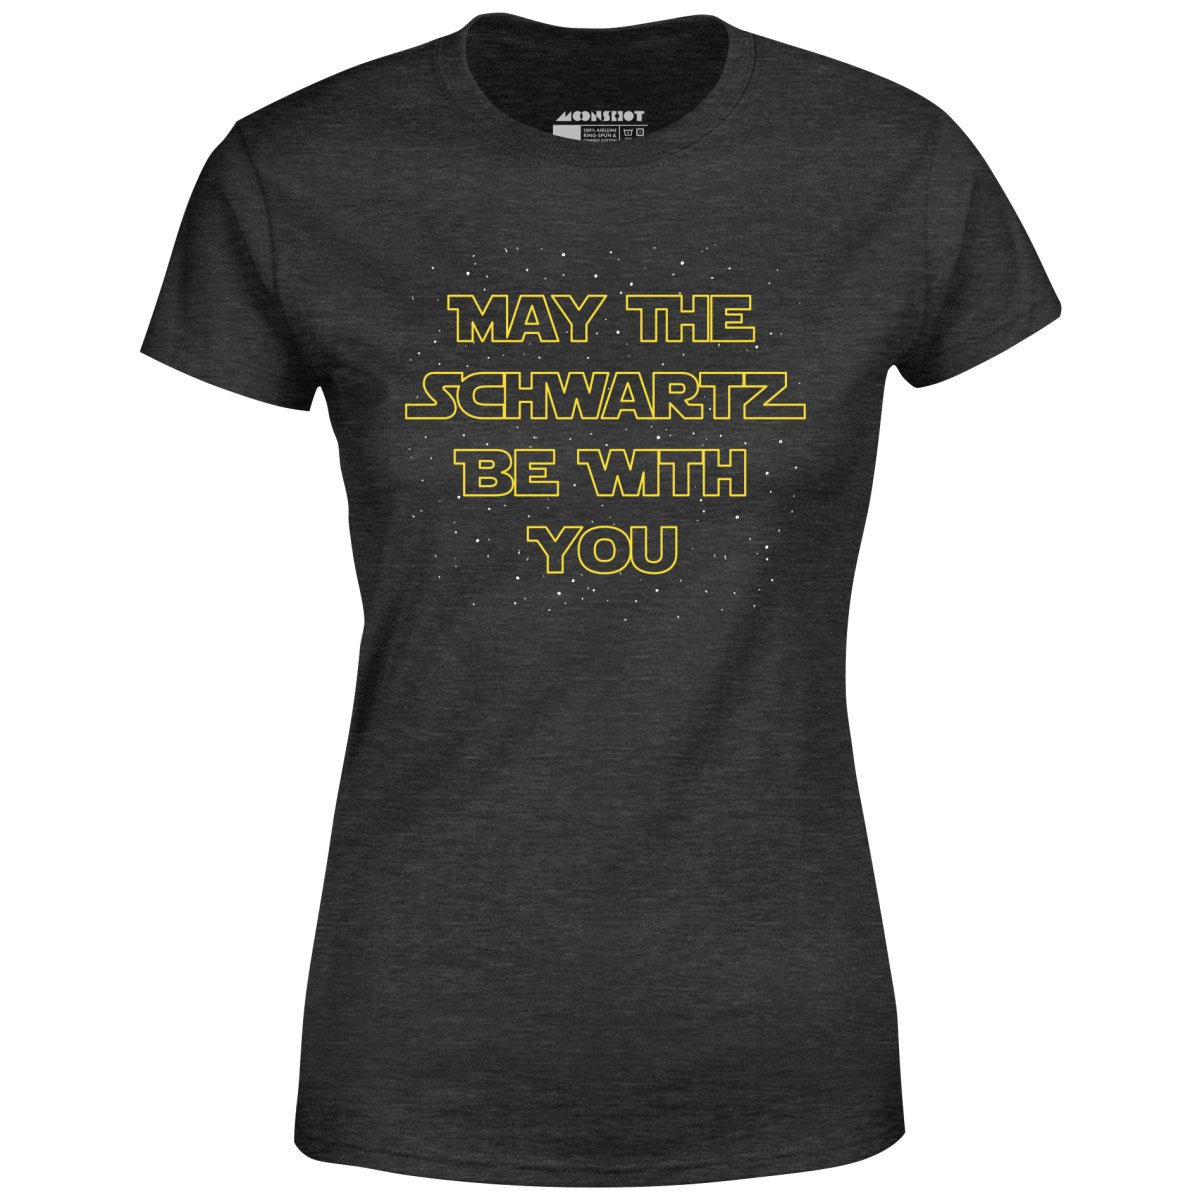 May The Schwartz Be With You - Women's T-Shirt